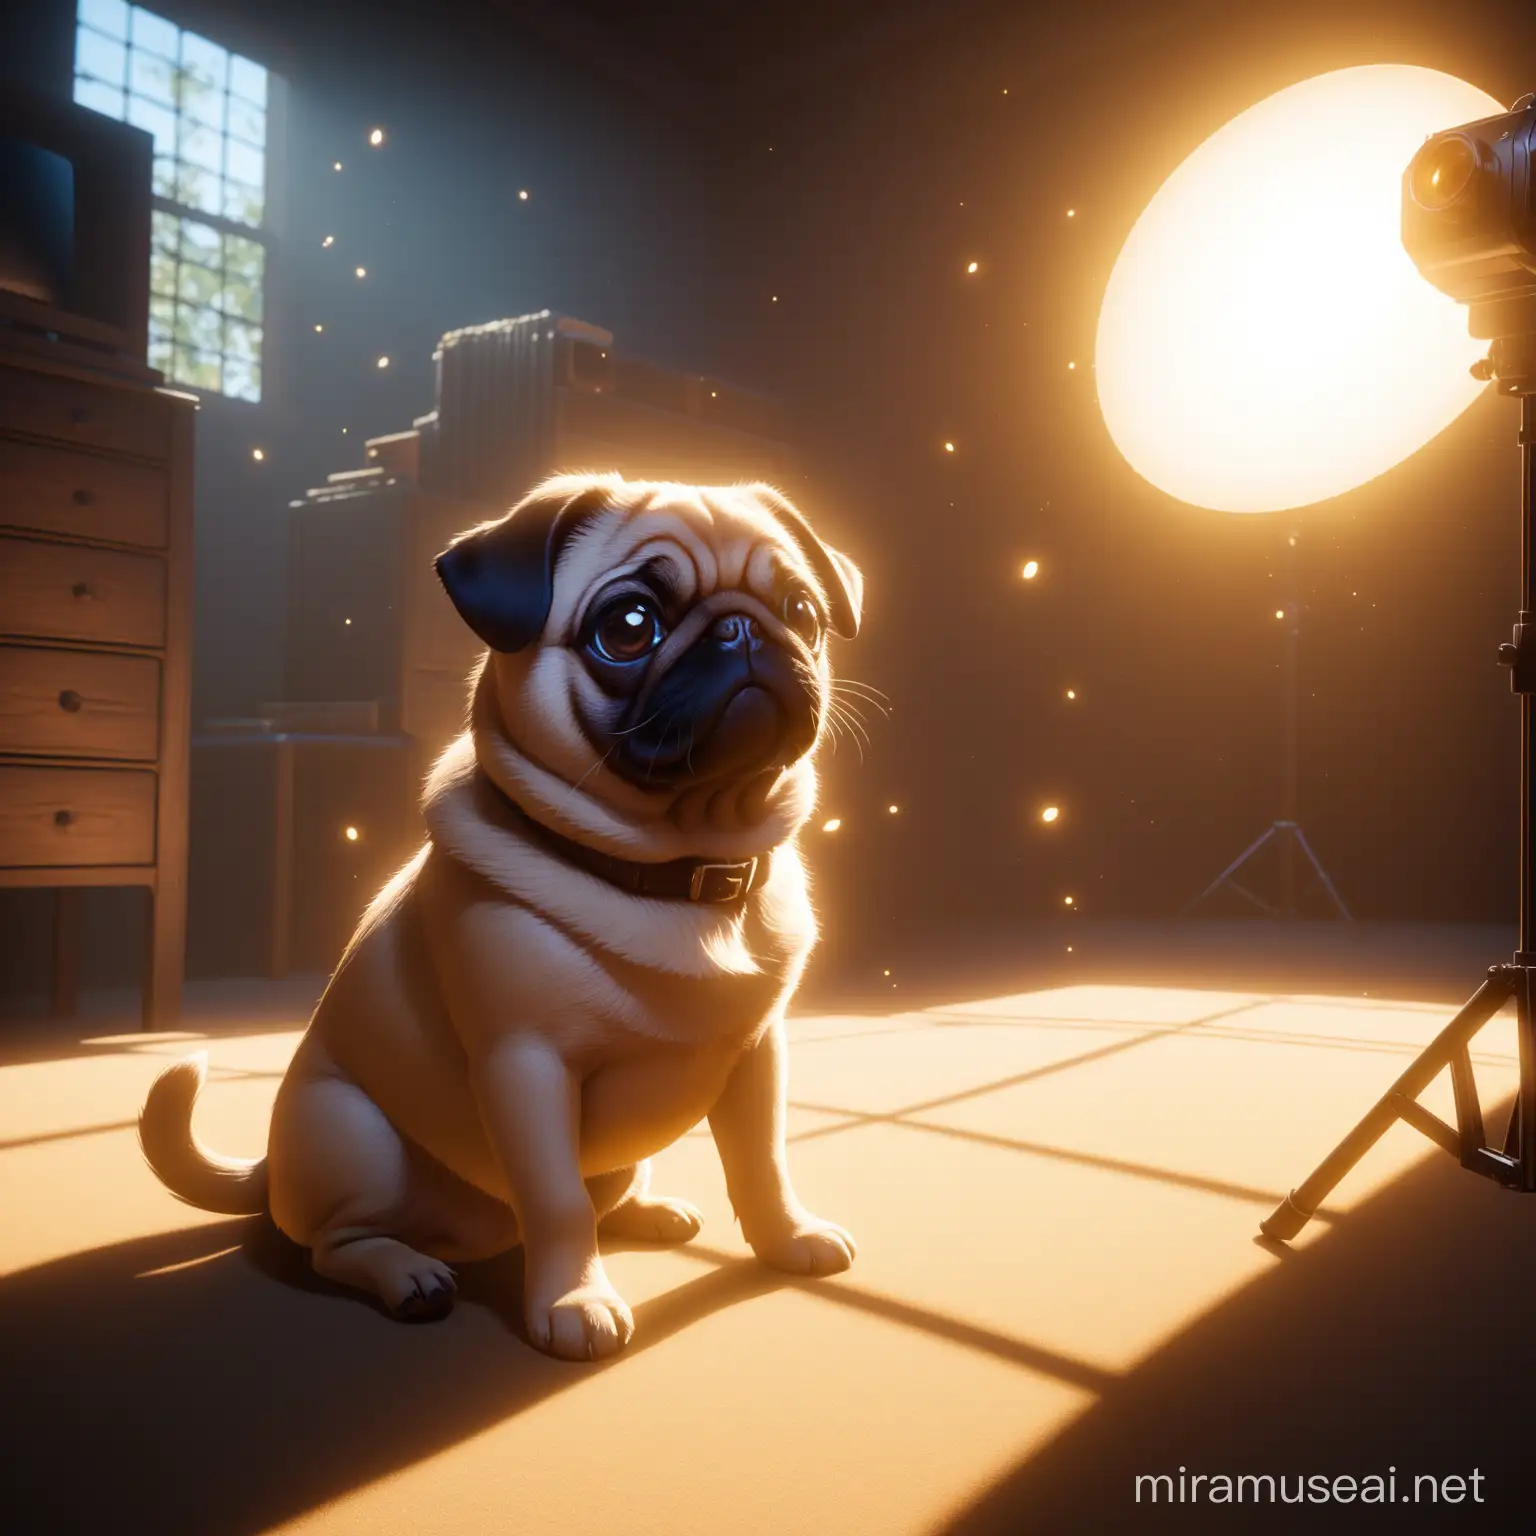 Pug,light background, color grading, unrealistic, super cute faces, super Unreal, Engine, VR, Good, Massive, Halfrear Lighting, Backlight, Natural Lighting, Incandescent, Optical Fiber, Cinematic Lighting, Studio Lighting, Soft Lighting, Volumetric, Contre-Jour, Beautiful Lighting, Accent Lighting, Global Illumination, Screen Space Global Illumination, Ray Tracing Global Illumination, Optics, Scattering, Glowing, Shadows, Rough, Shimmering, Ray Tracing Reflections, Lumen ReflectionsDepth of Field, Unreal Engine, professional mid journey prompt by sam mcfly, in the style of digital art techniques, cute and dreamy, whimsical design, cryengine, mischievous feline motif, album covers, d&d --ar 99:124 --v 5 --s 250
